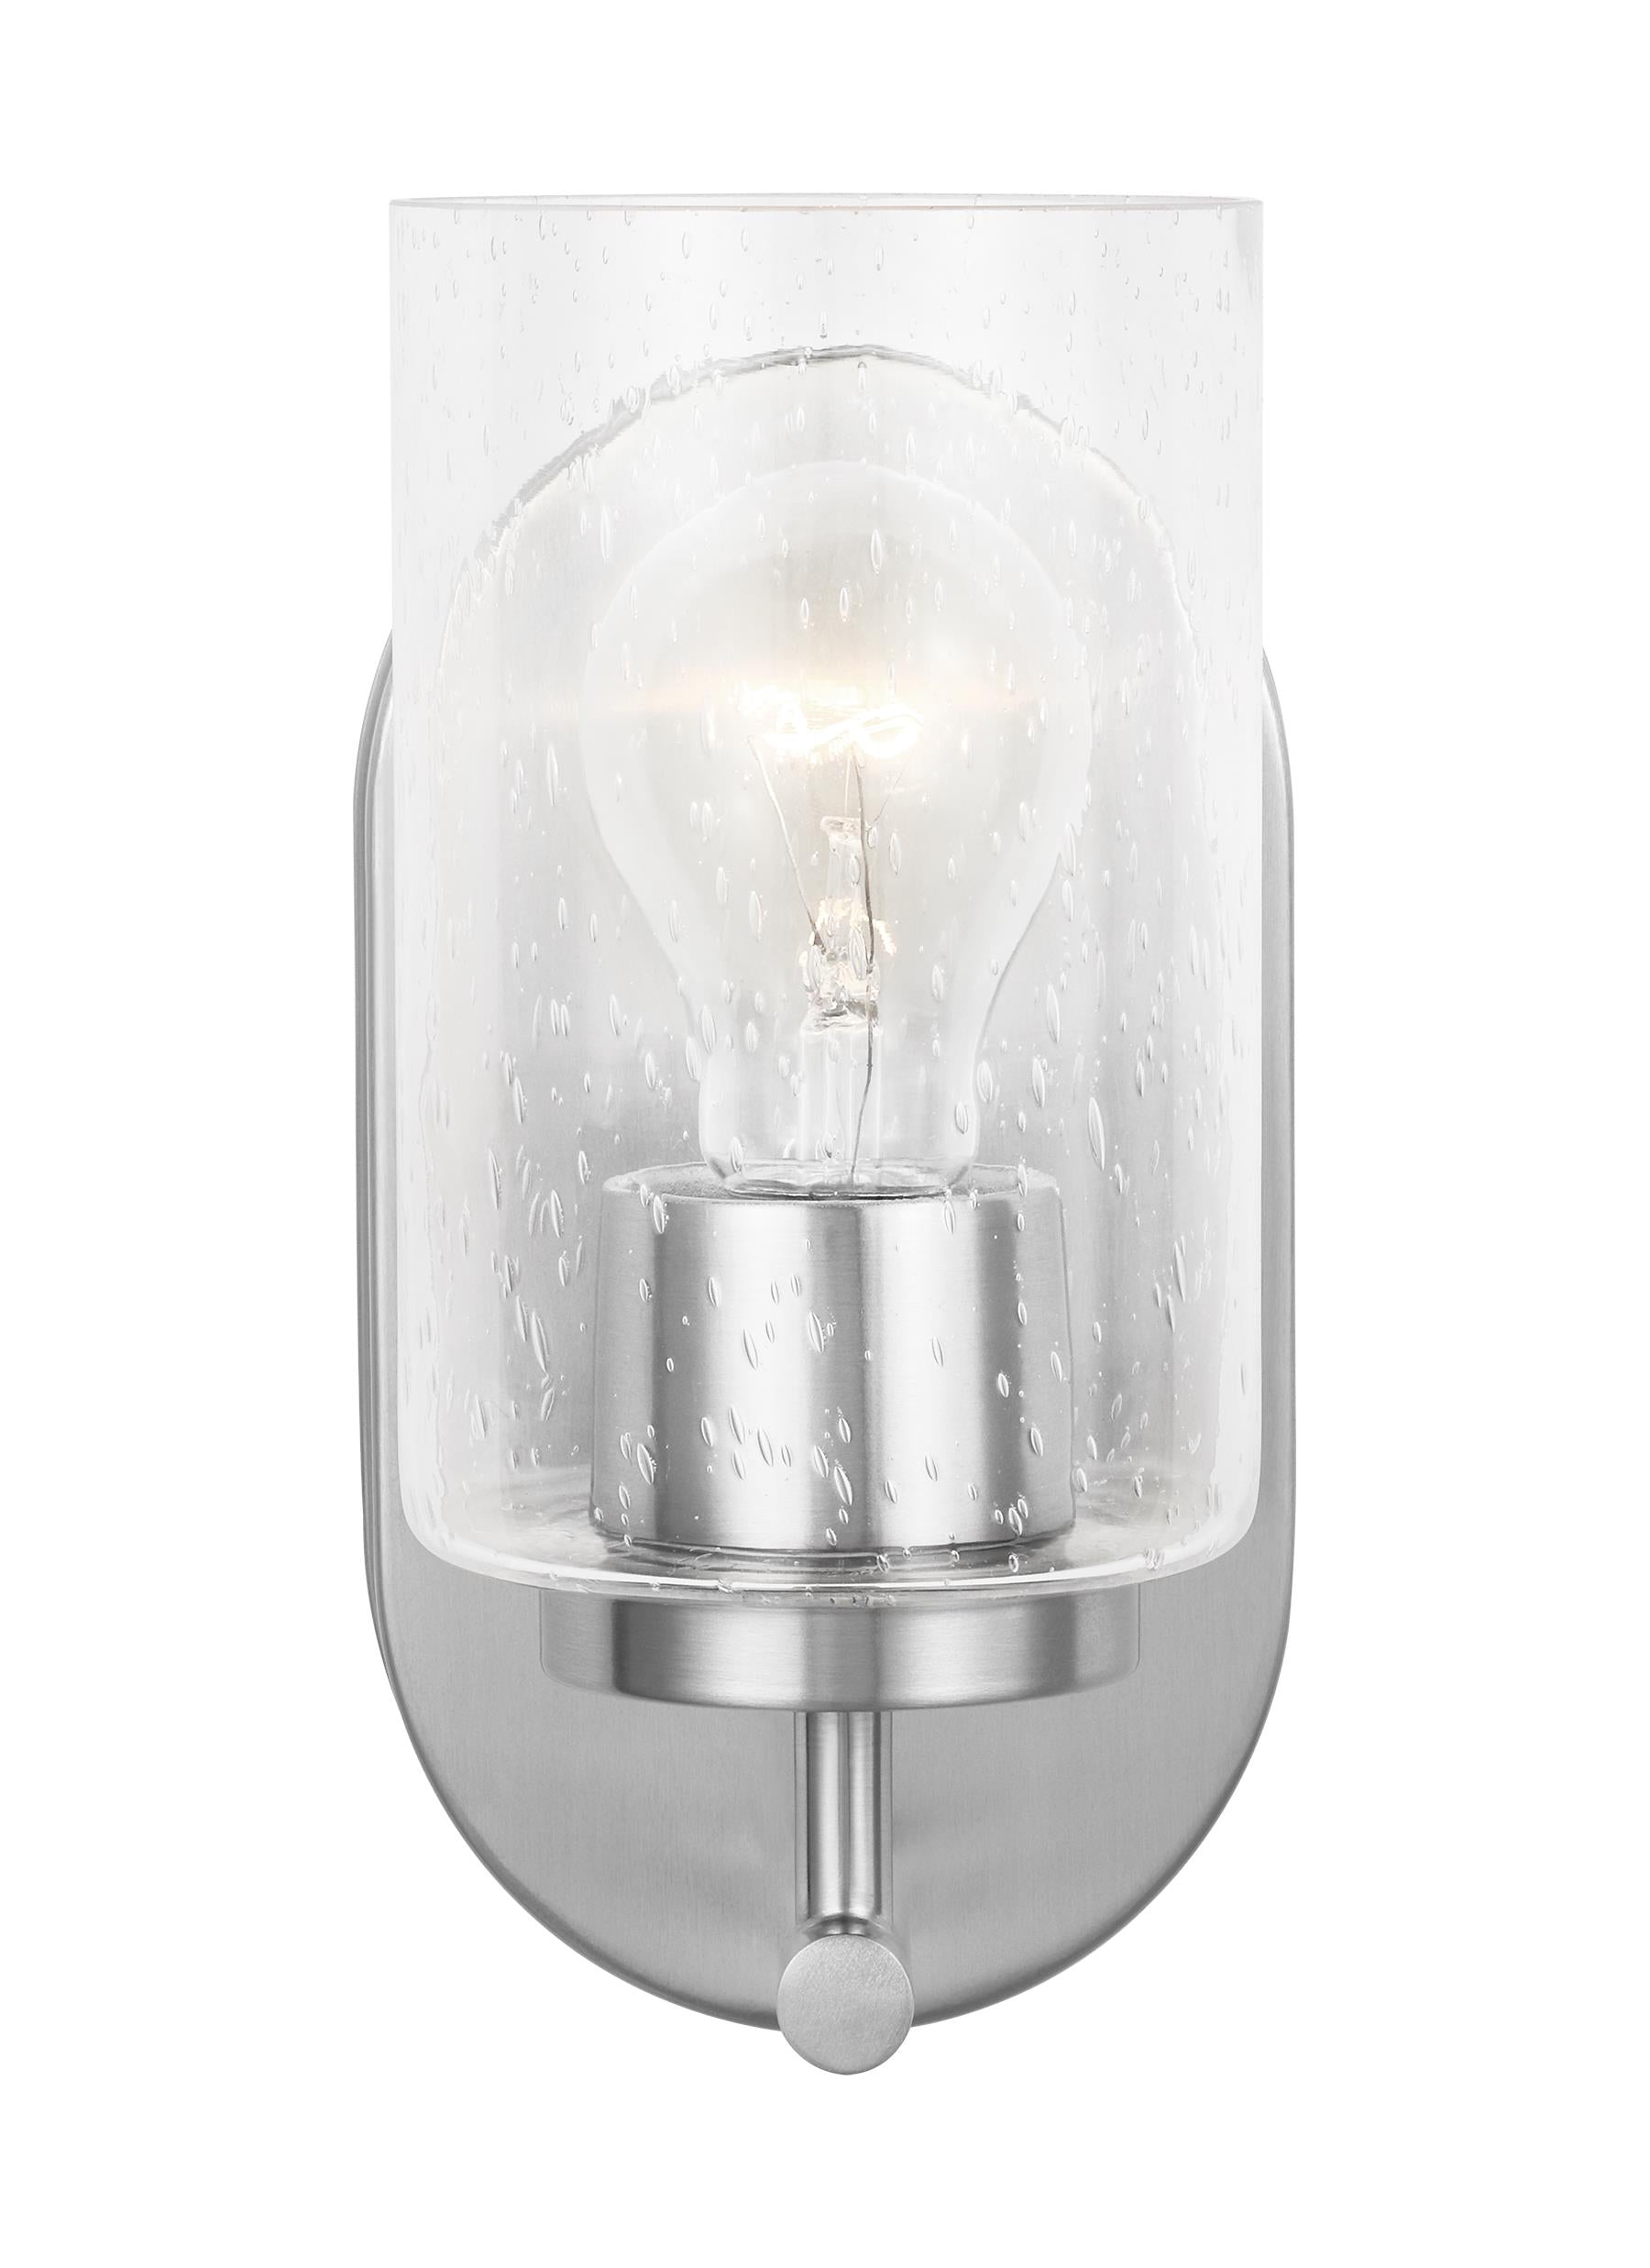 Oslo dimmable 1-light wall bath sconce in a brushed nickel finish with clear seeded glass shade